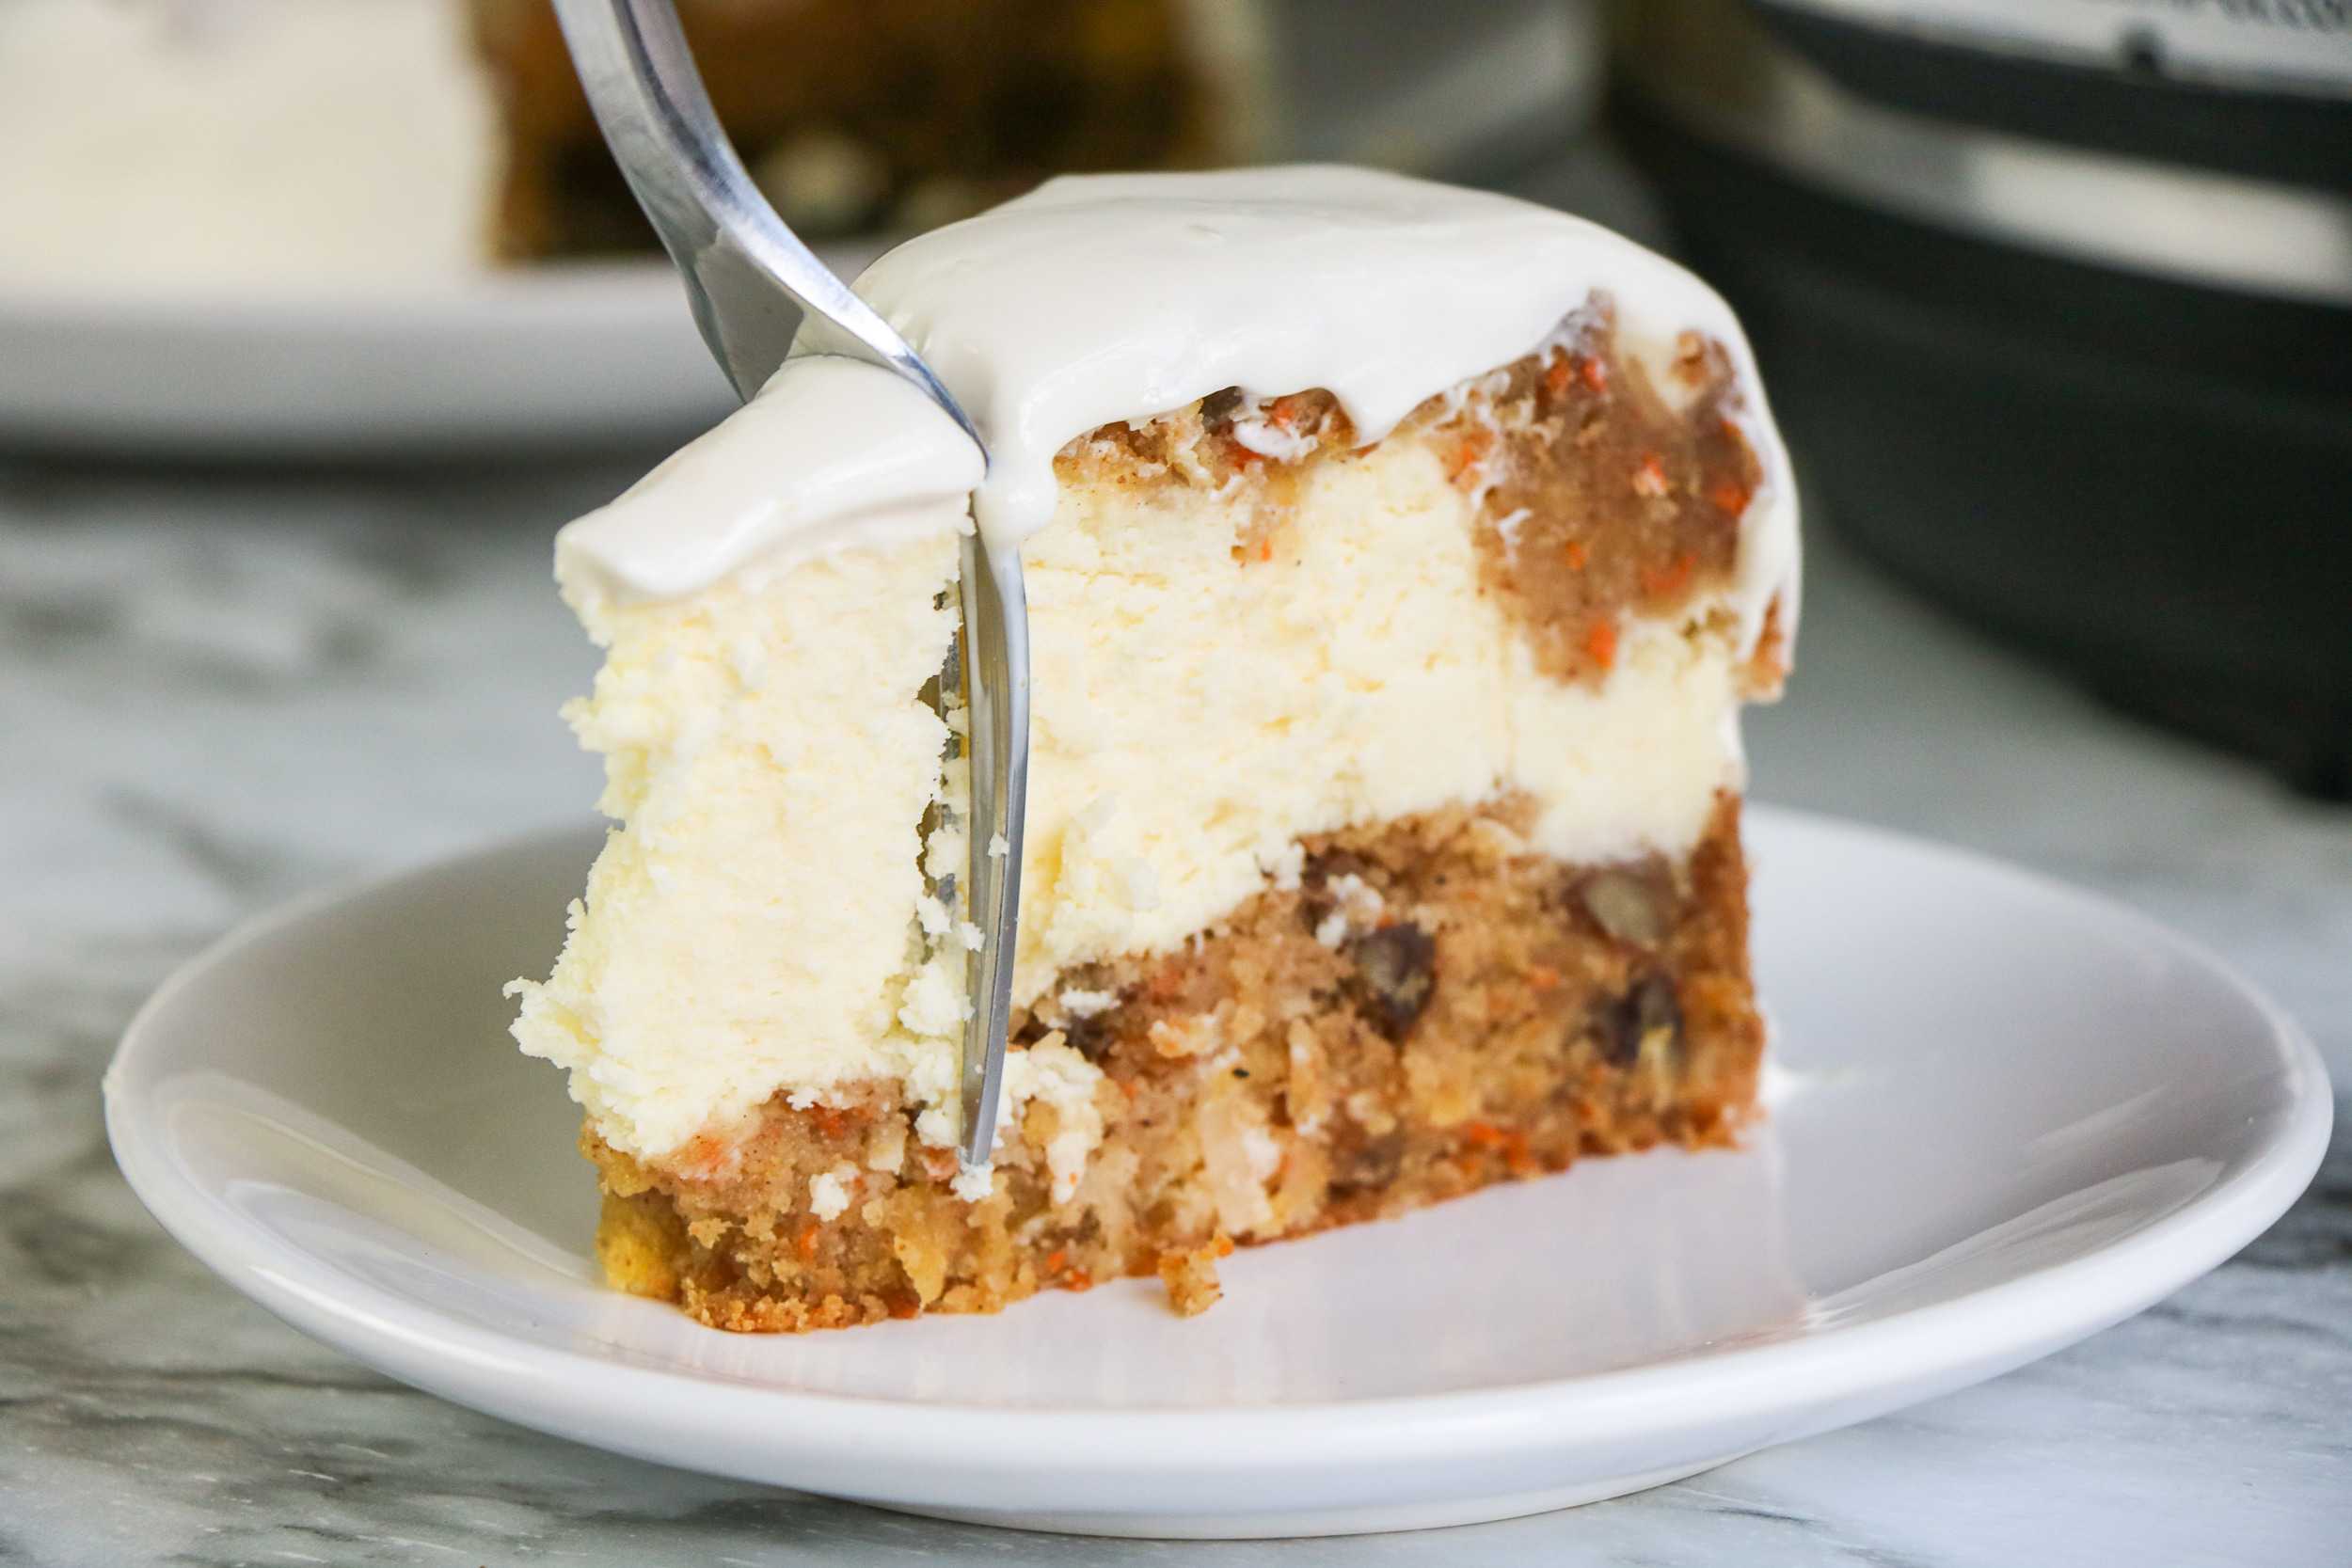 Slice of Instant Pot Carrot Cake Cheesecake on plate